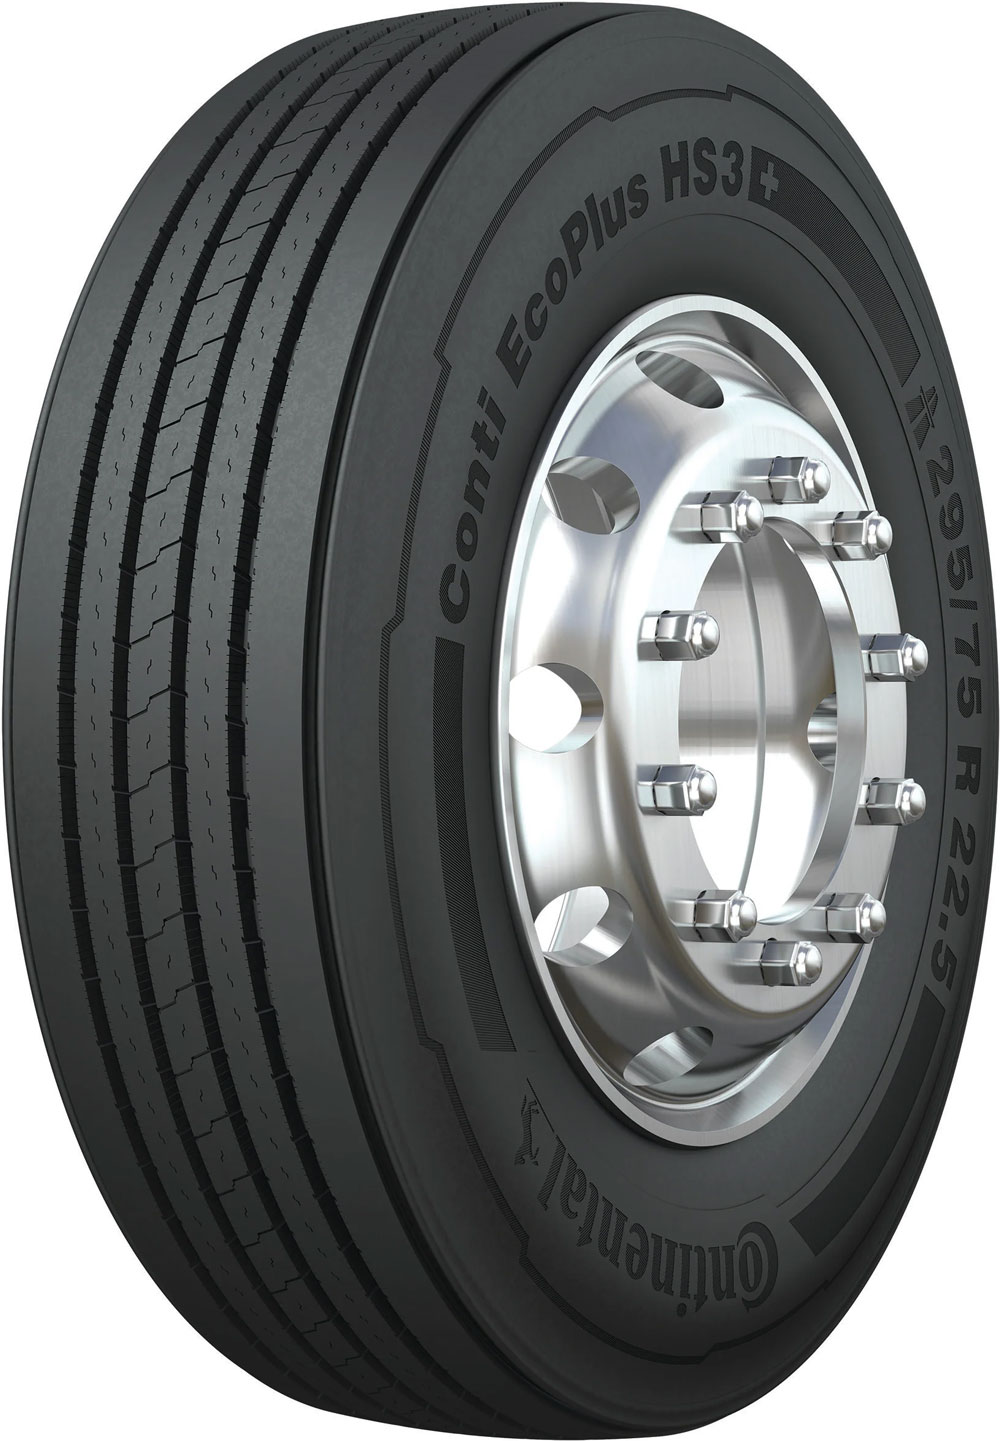 product_type-heavy_tires CONTINENTAL EcoPlus HS3+ 315/60 R22.5 154L